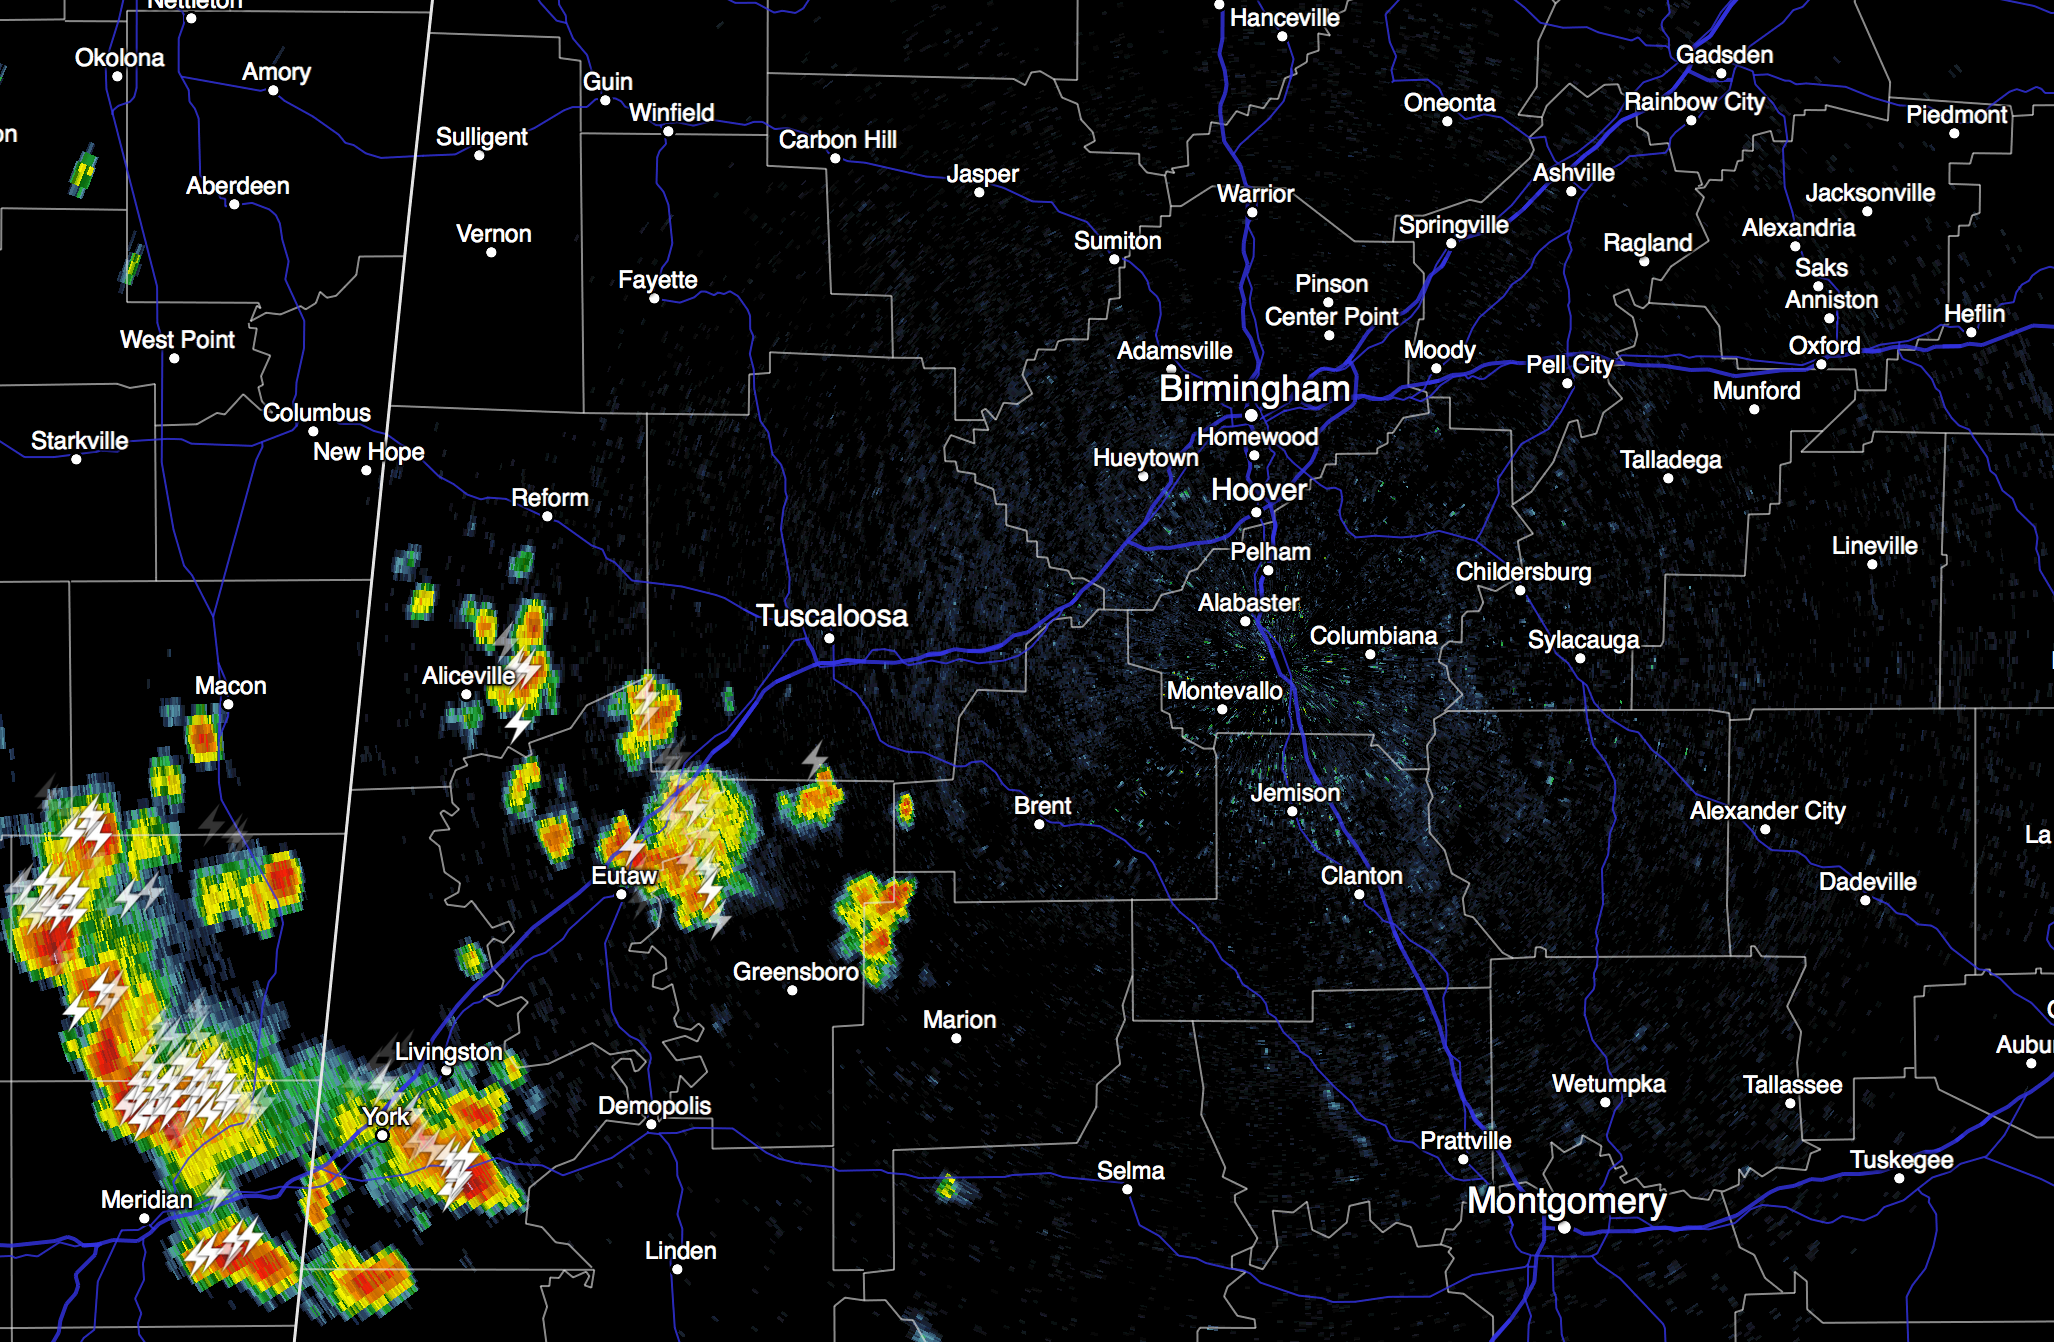 A Few Storms Over West Alabama